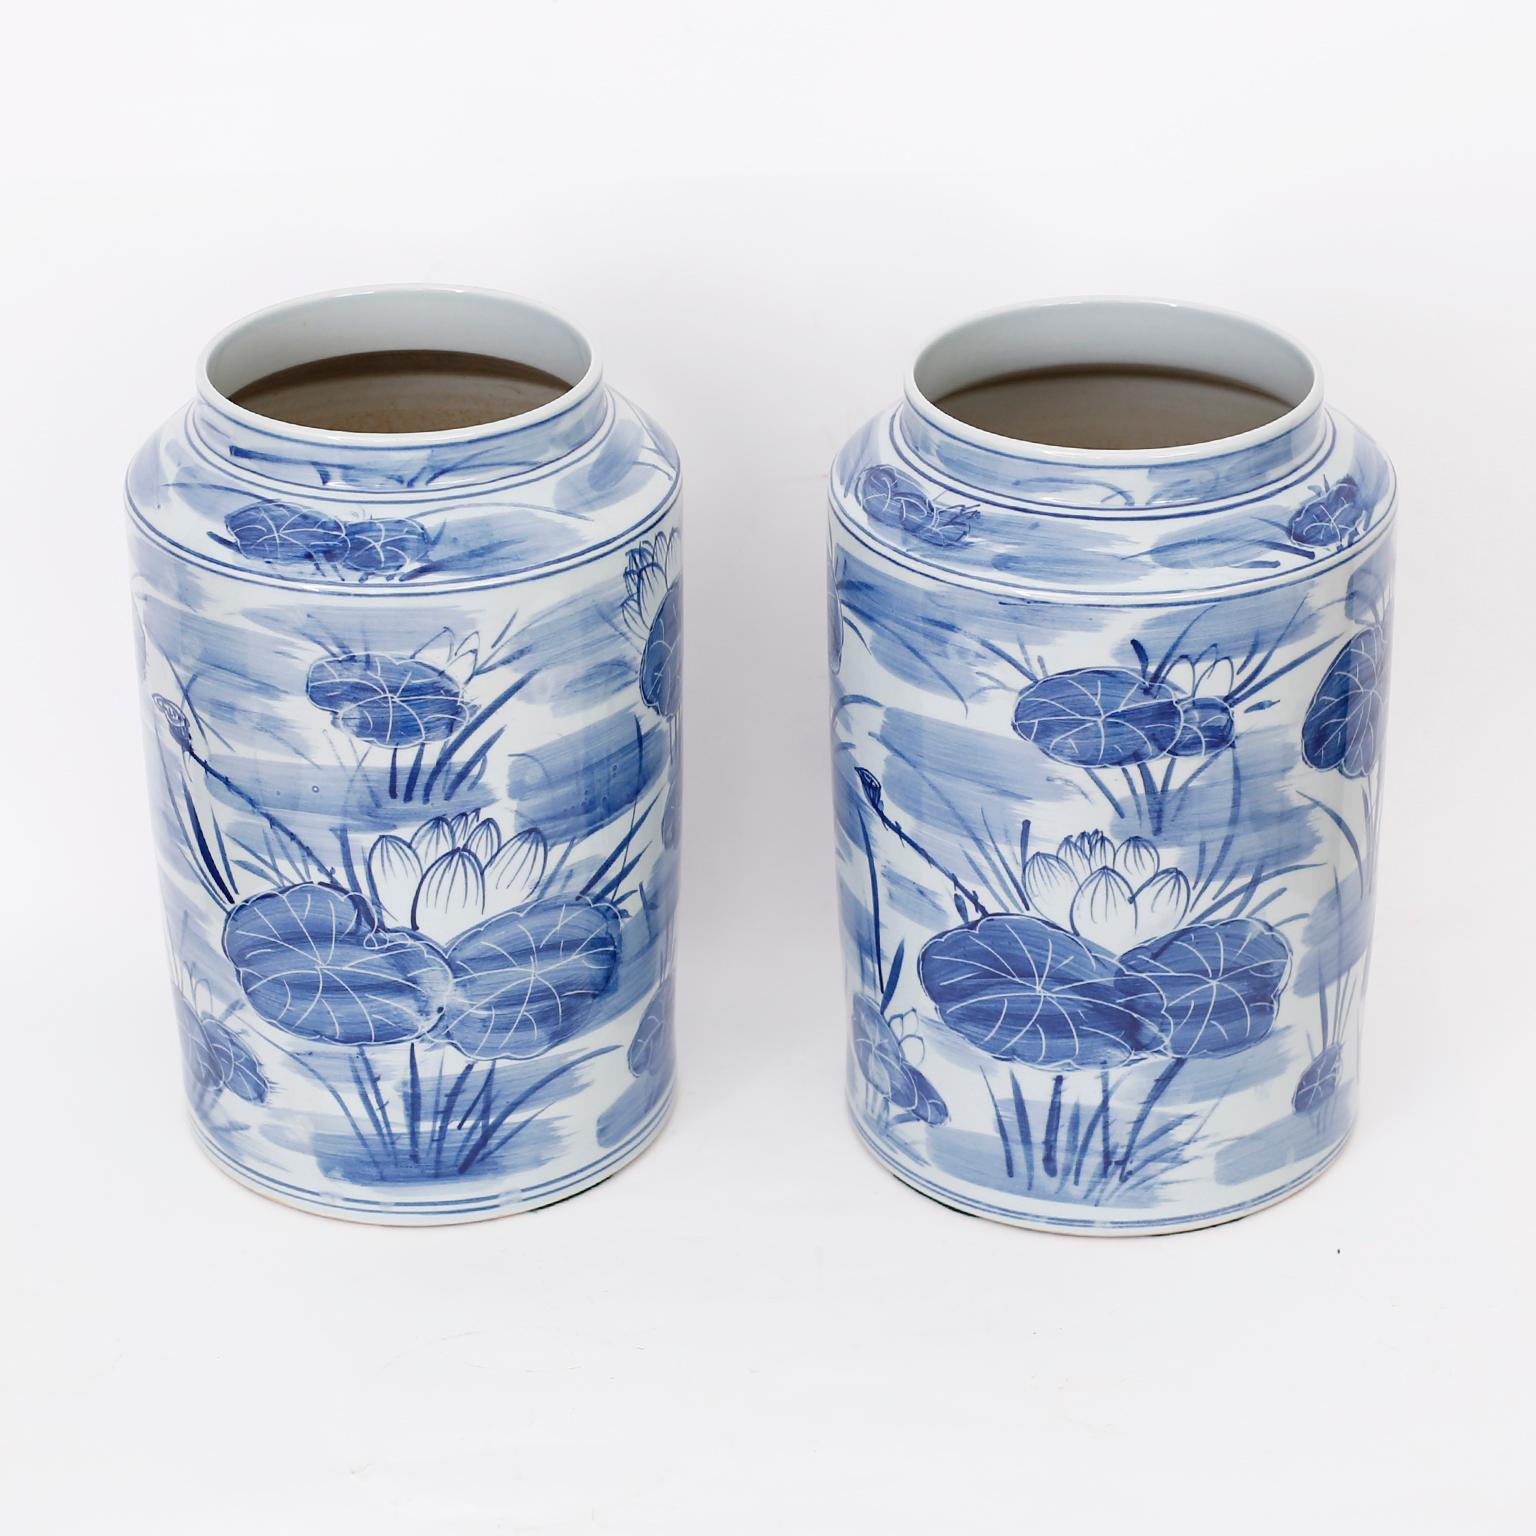 Pair of Chinese blue and white vases with classic form and hand decorated in an unusual modern style with a waterlily motif all around.